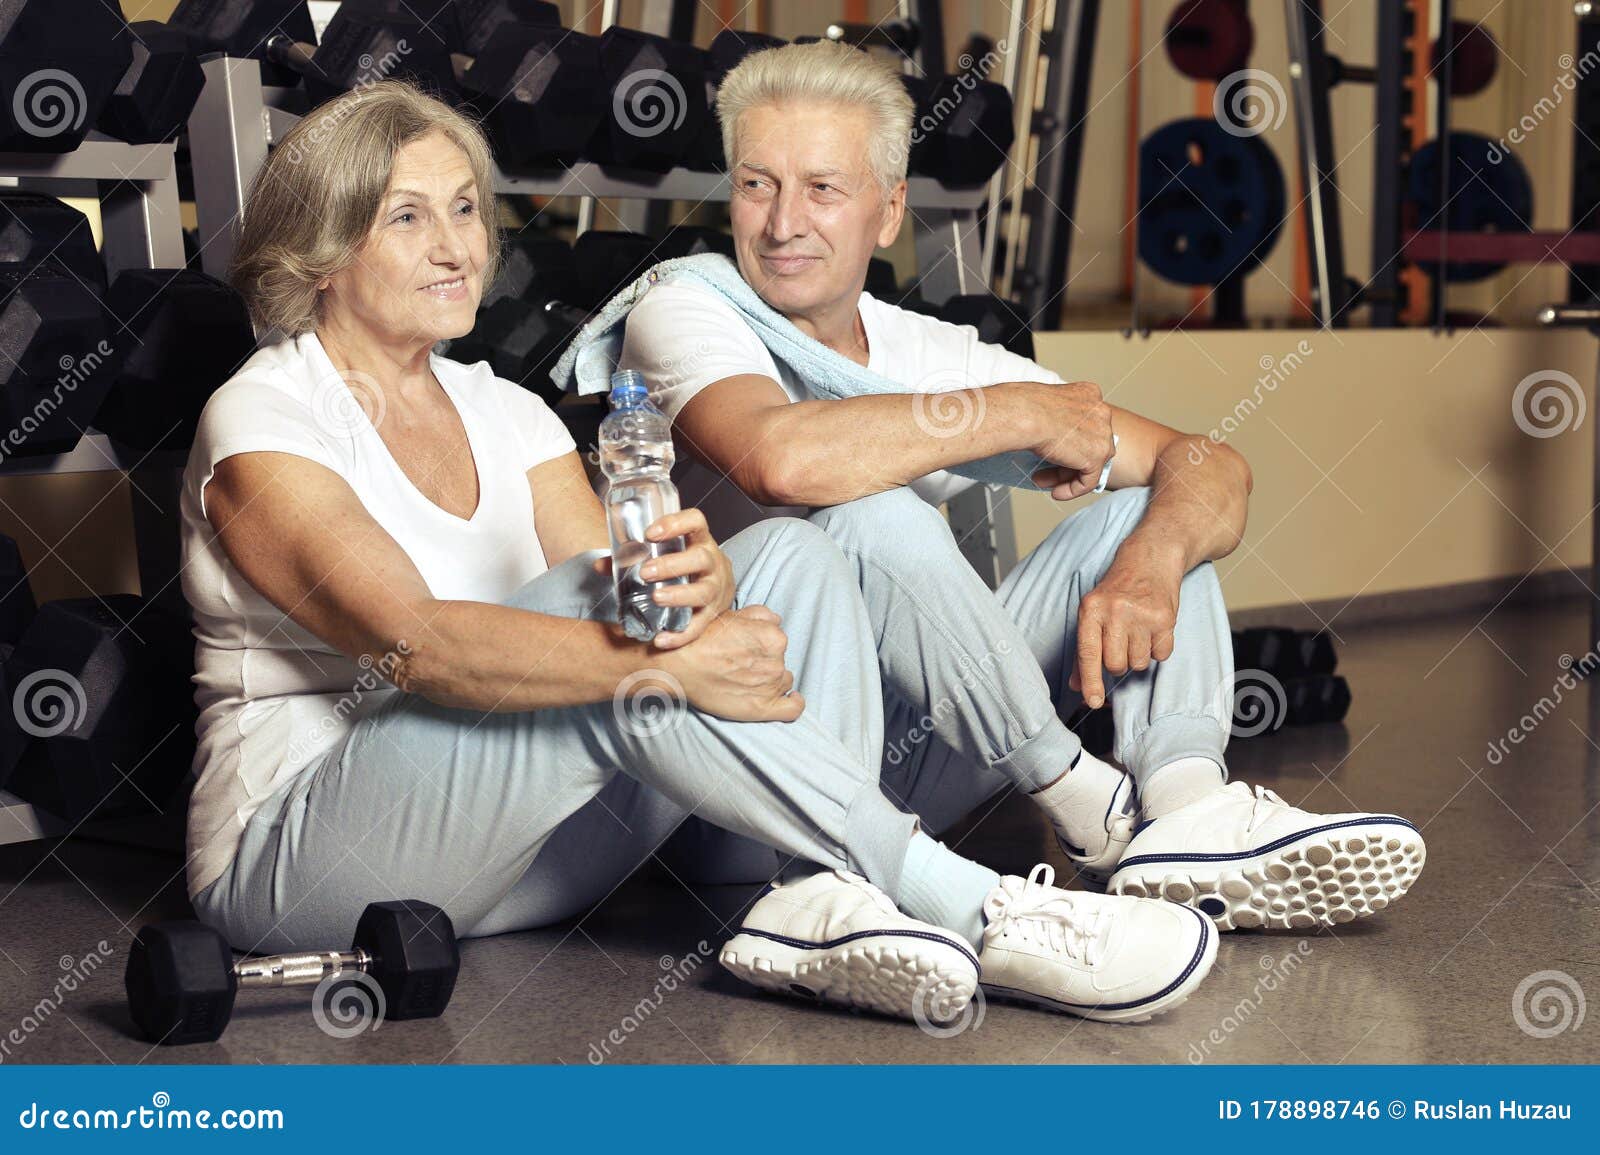 Portrait Of Senior Couple Drinking In Gym Stock Photo Image Of